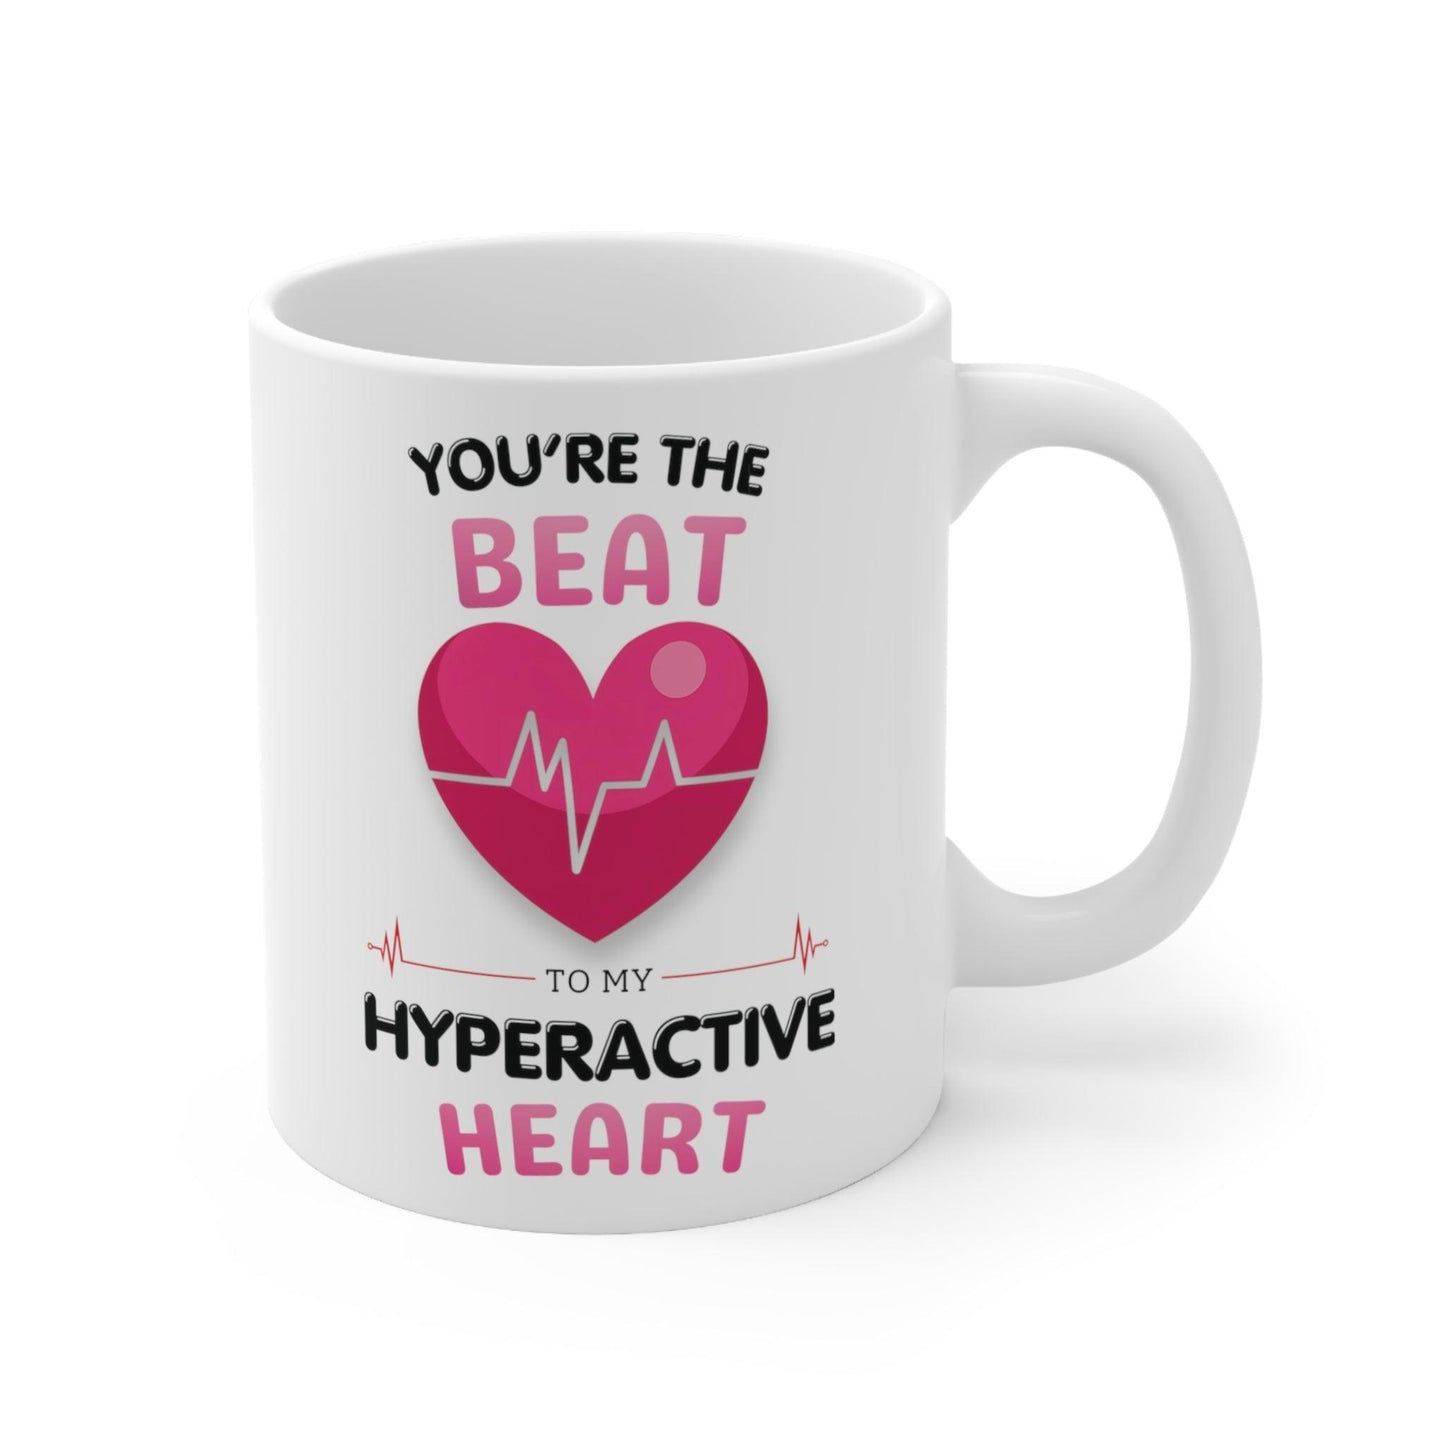 Valentine's ADHD Love Mug - 'You're the Beat to My Hyperactive Heart' Romantic Gift Coffee Cup - Fidget and Focus